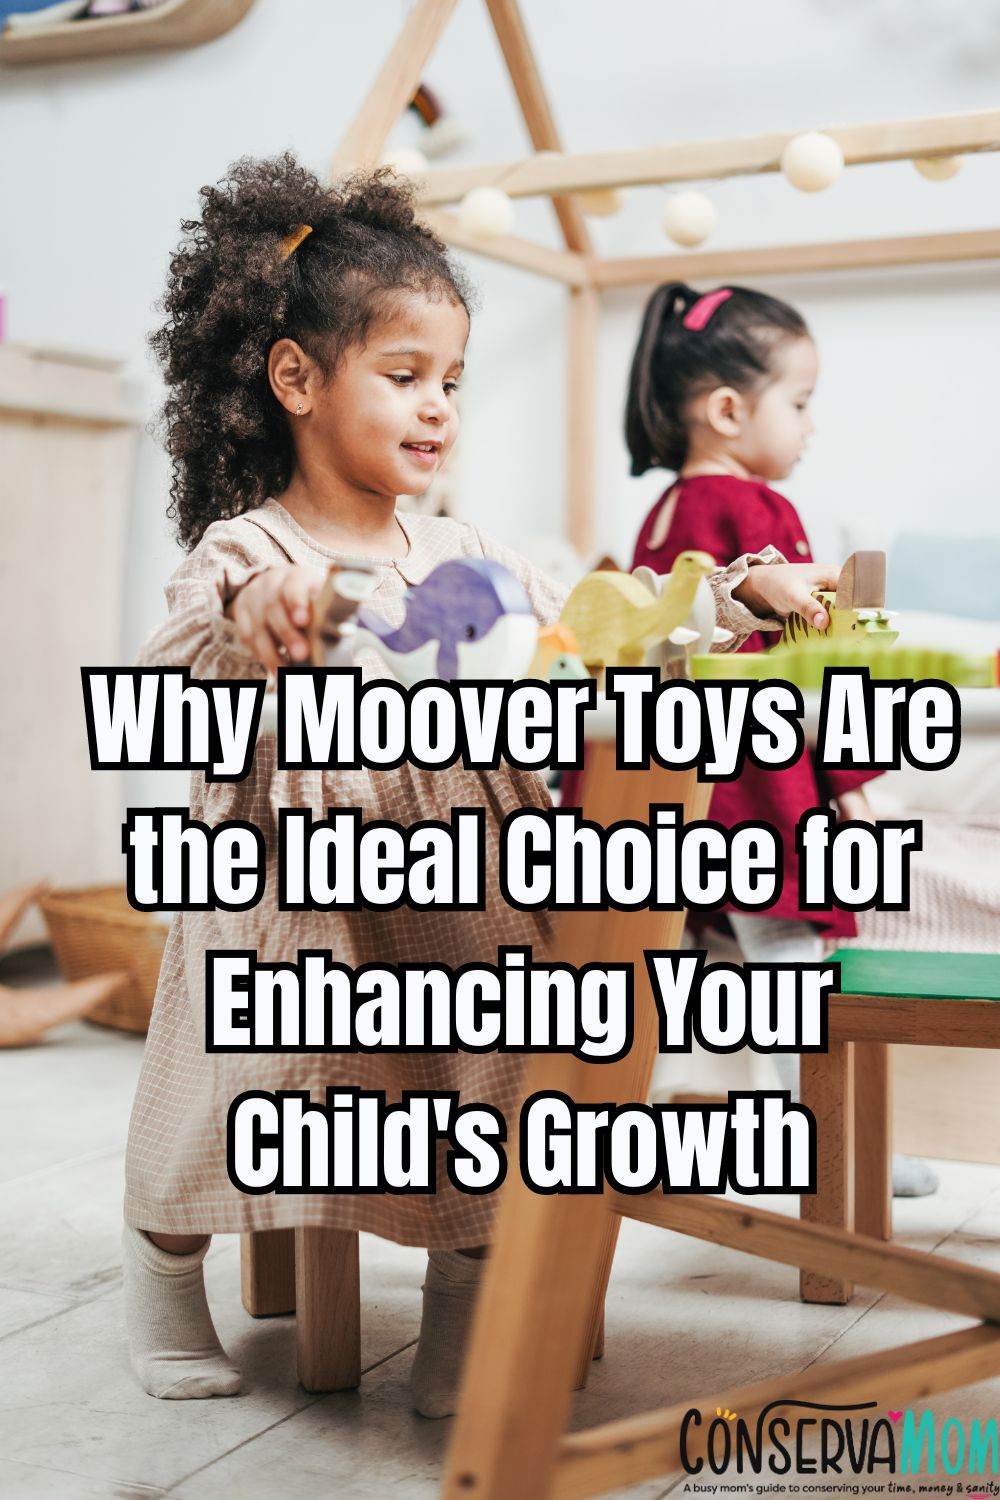 Why Moover Toys Are the Ideal Choice for Enhancing Your Child's Growth